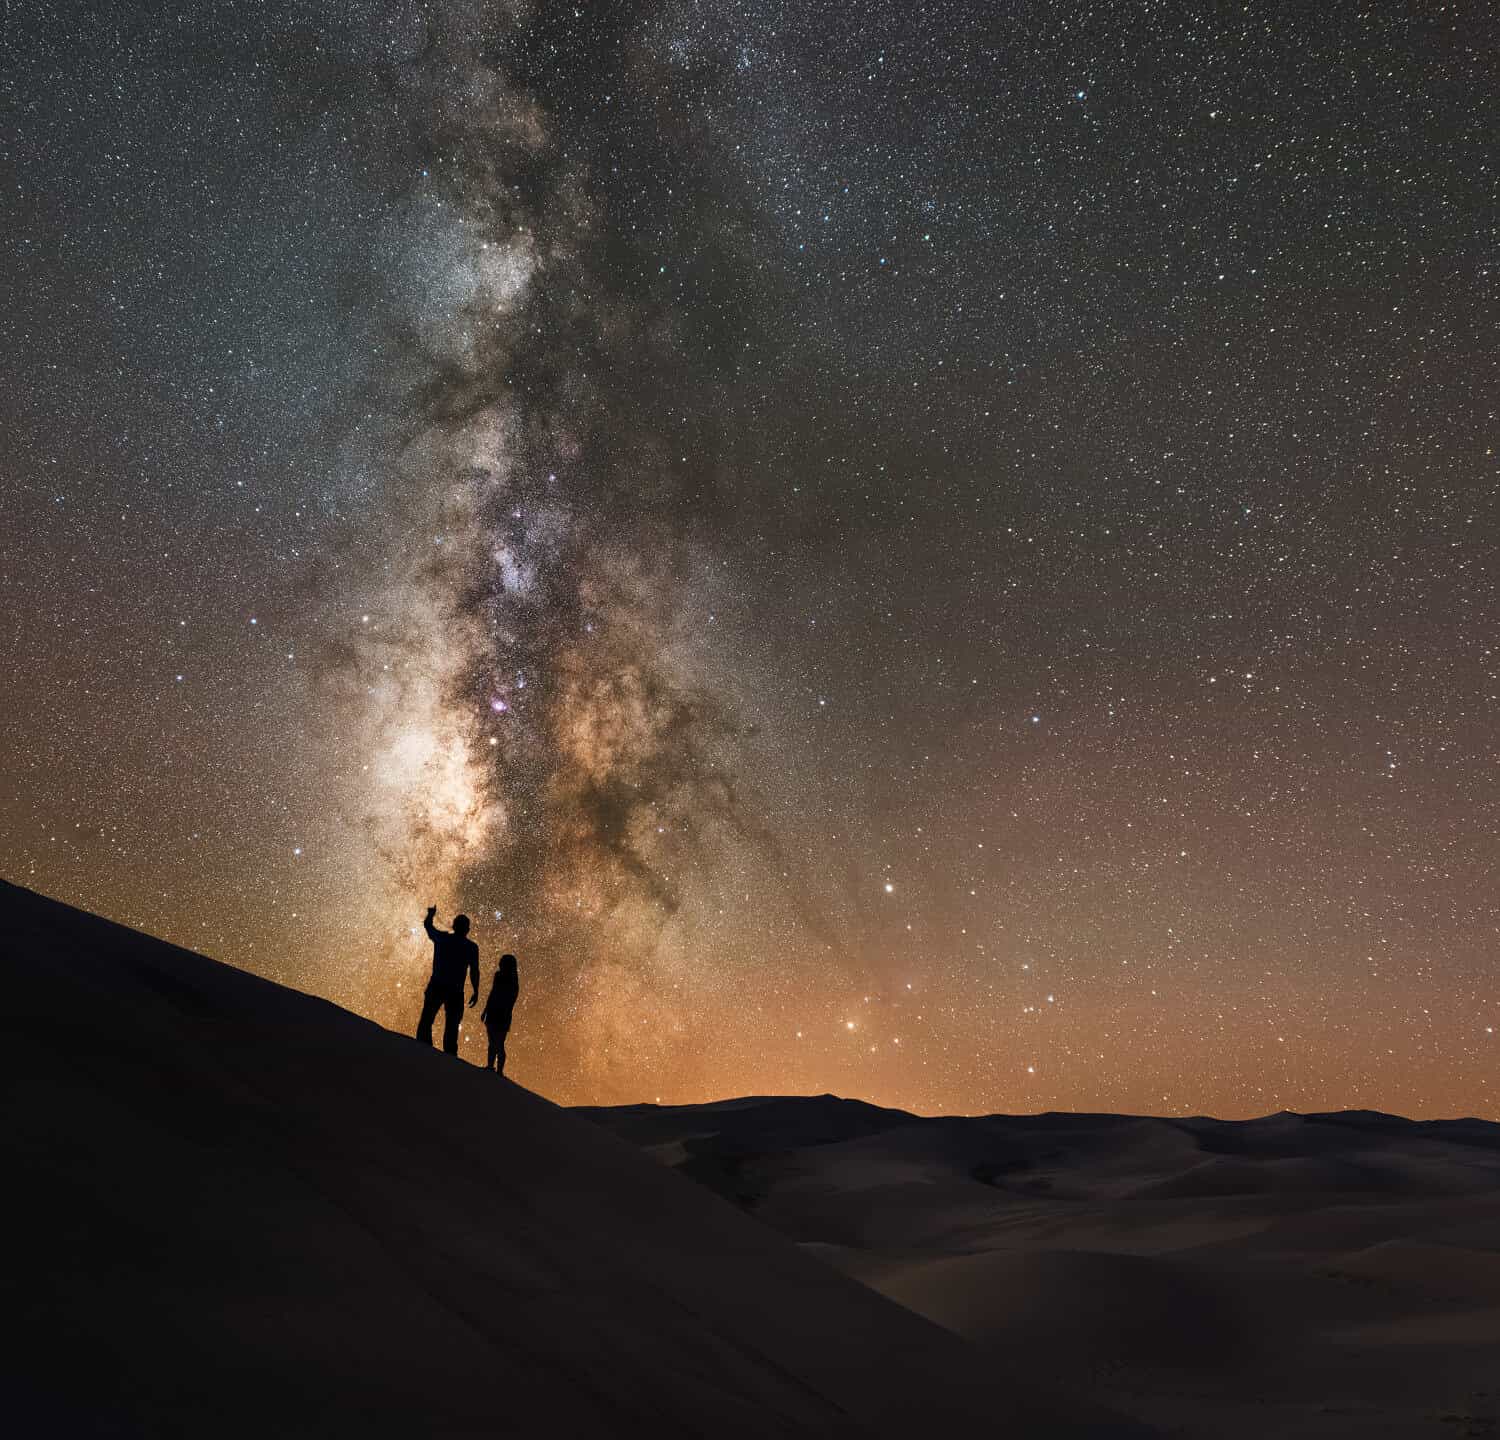 Stargazers at Great Sand Dunes National Park looking at the Milky Way Galaxy.